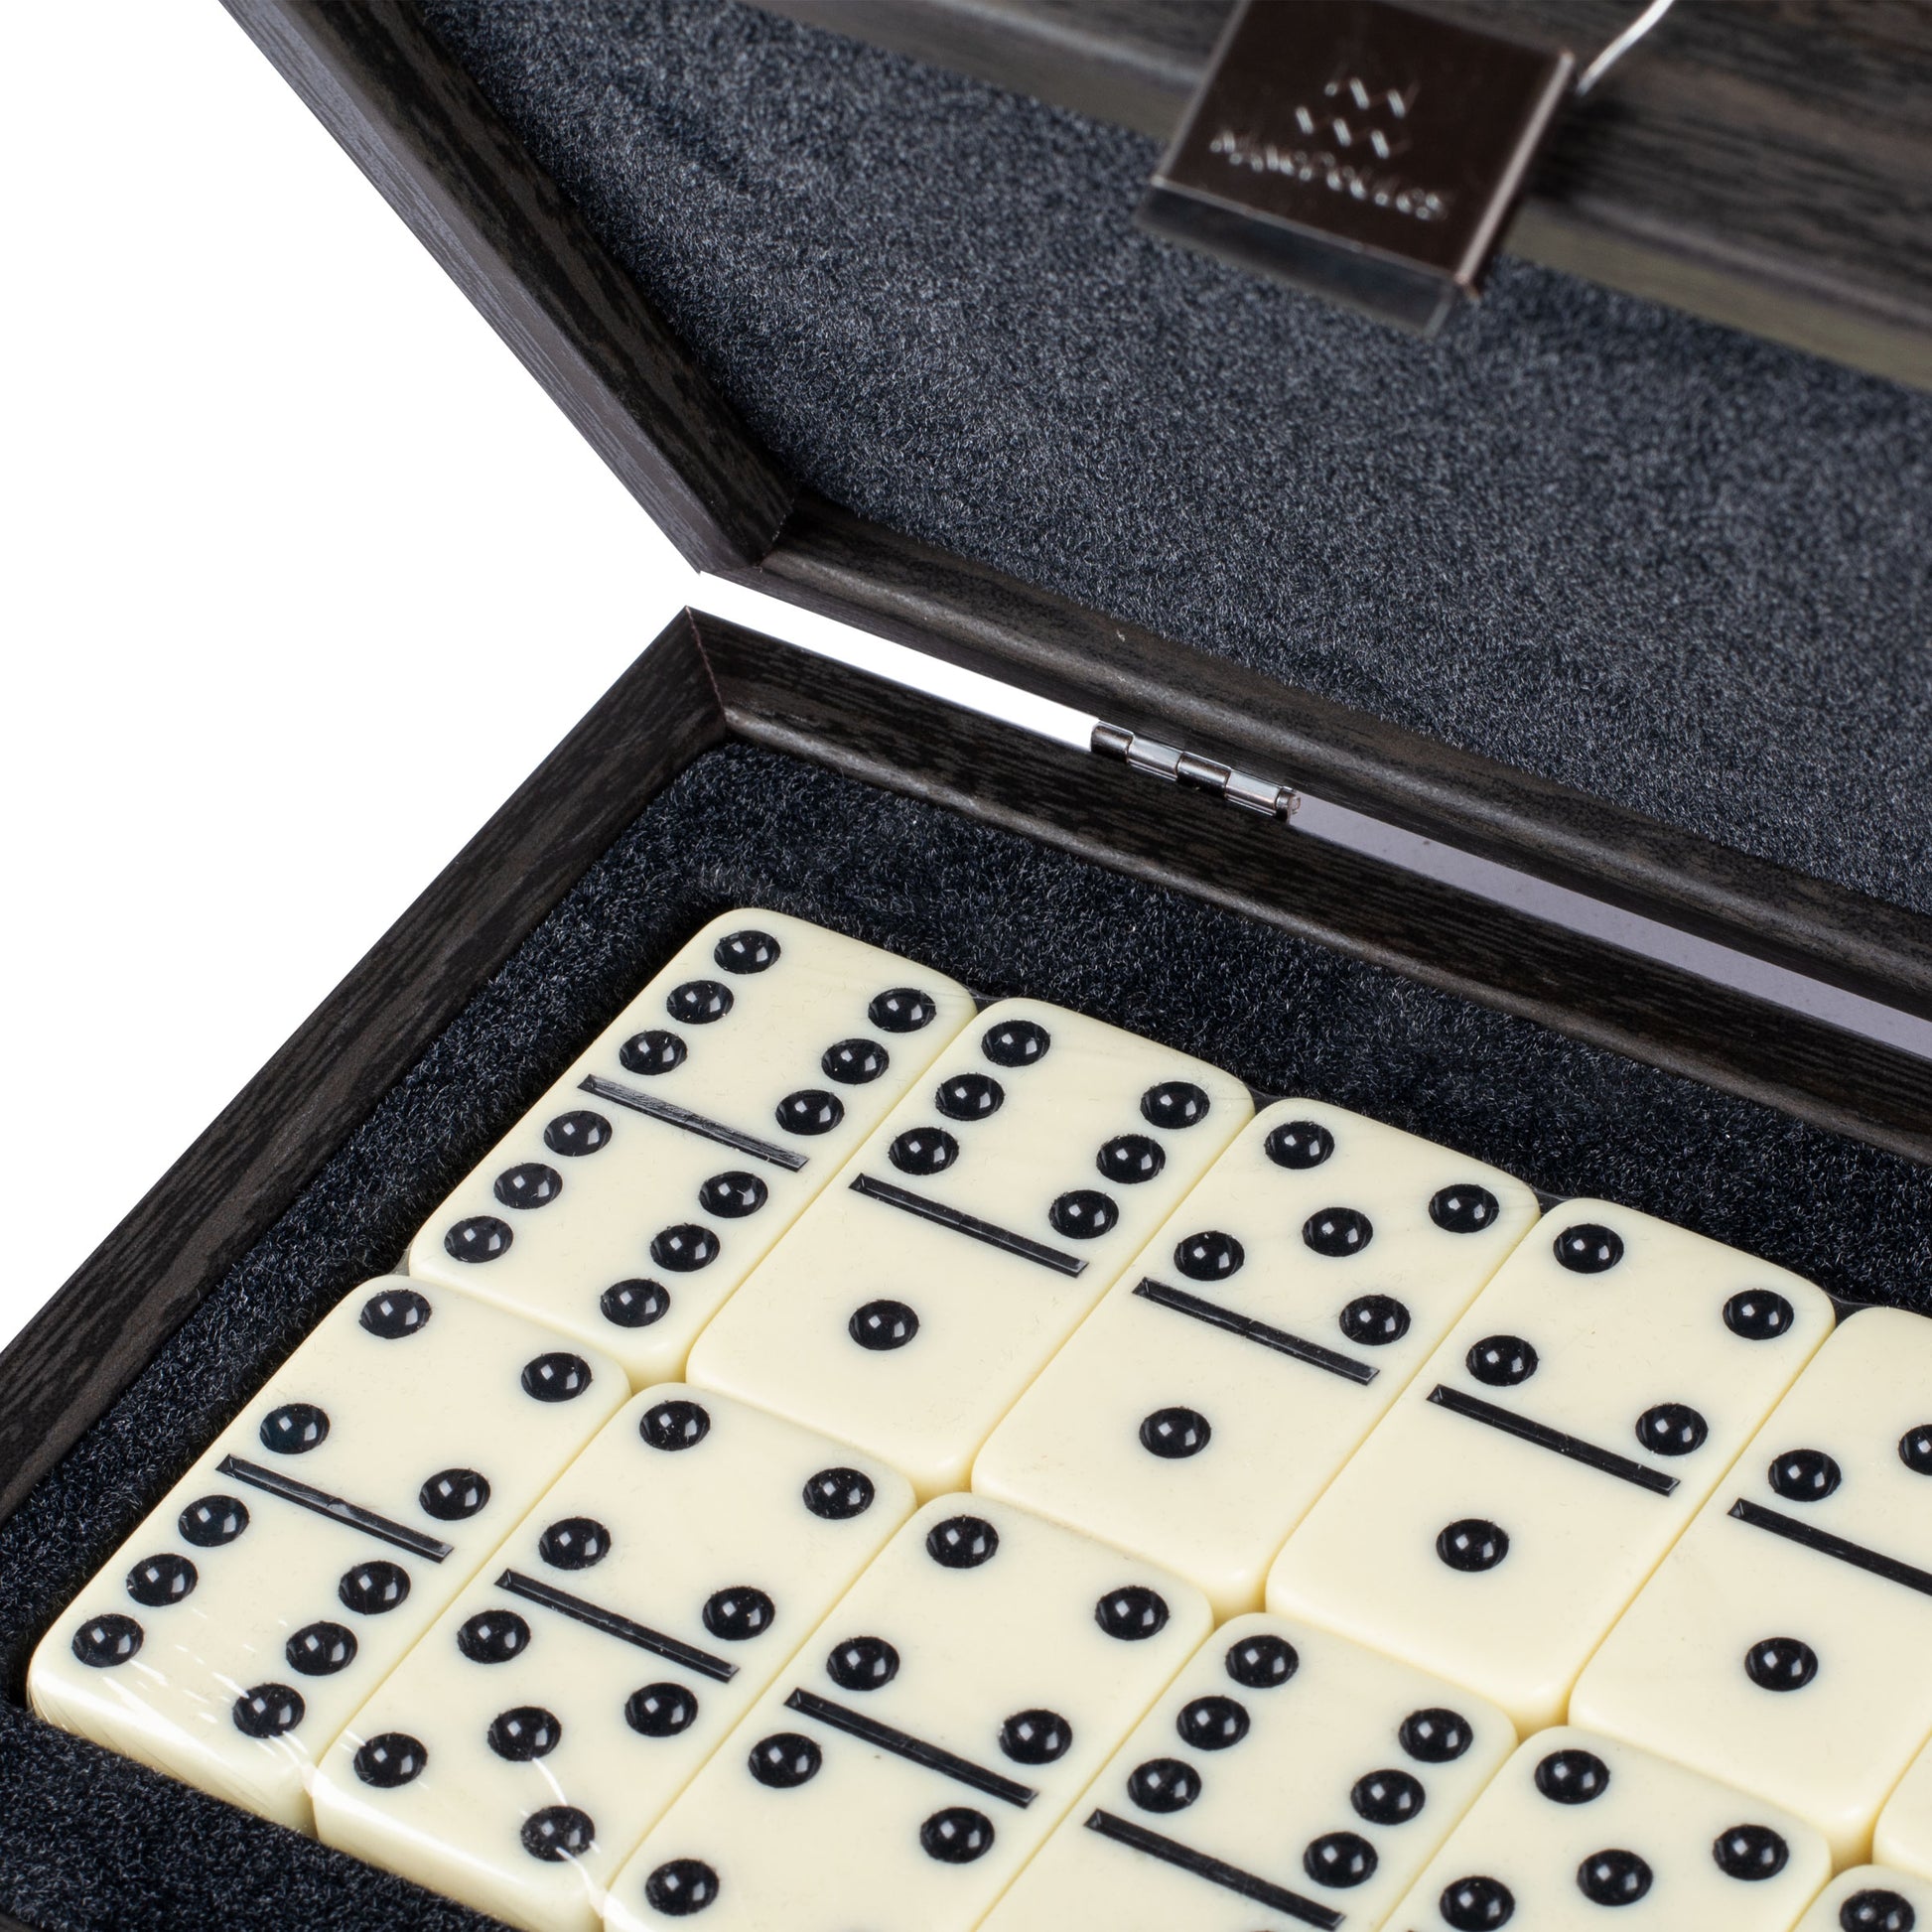 Premium Domino Set in Dark Grey Leather Croc Tote with Wooden Case - Premium Dominoes from MANOPOULOS Chess & Backgammon - Just €62.50! Shop now at MANOPOULOS Chess & Backgammon